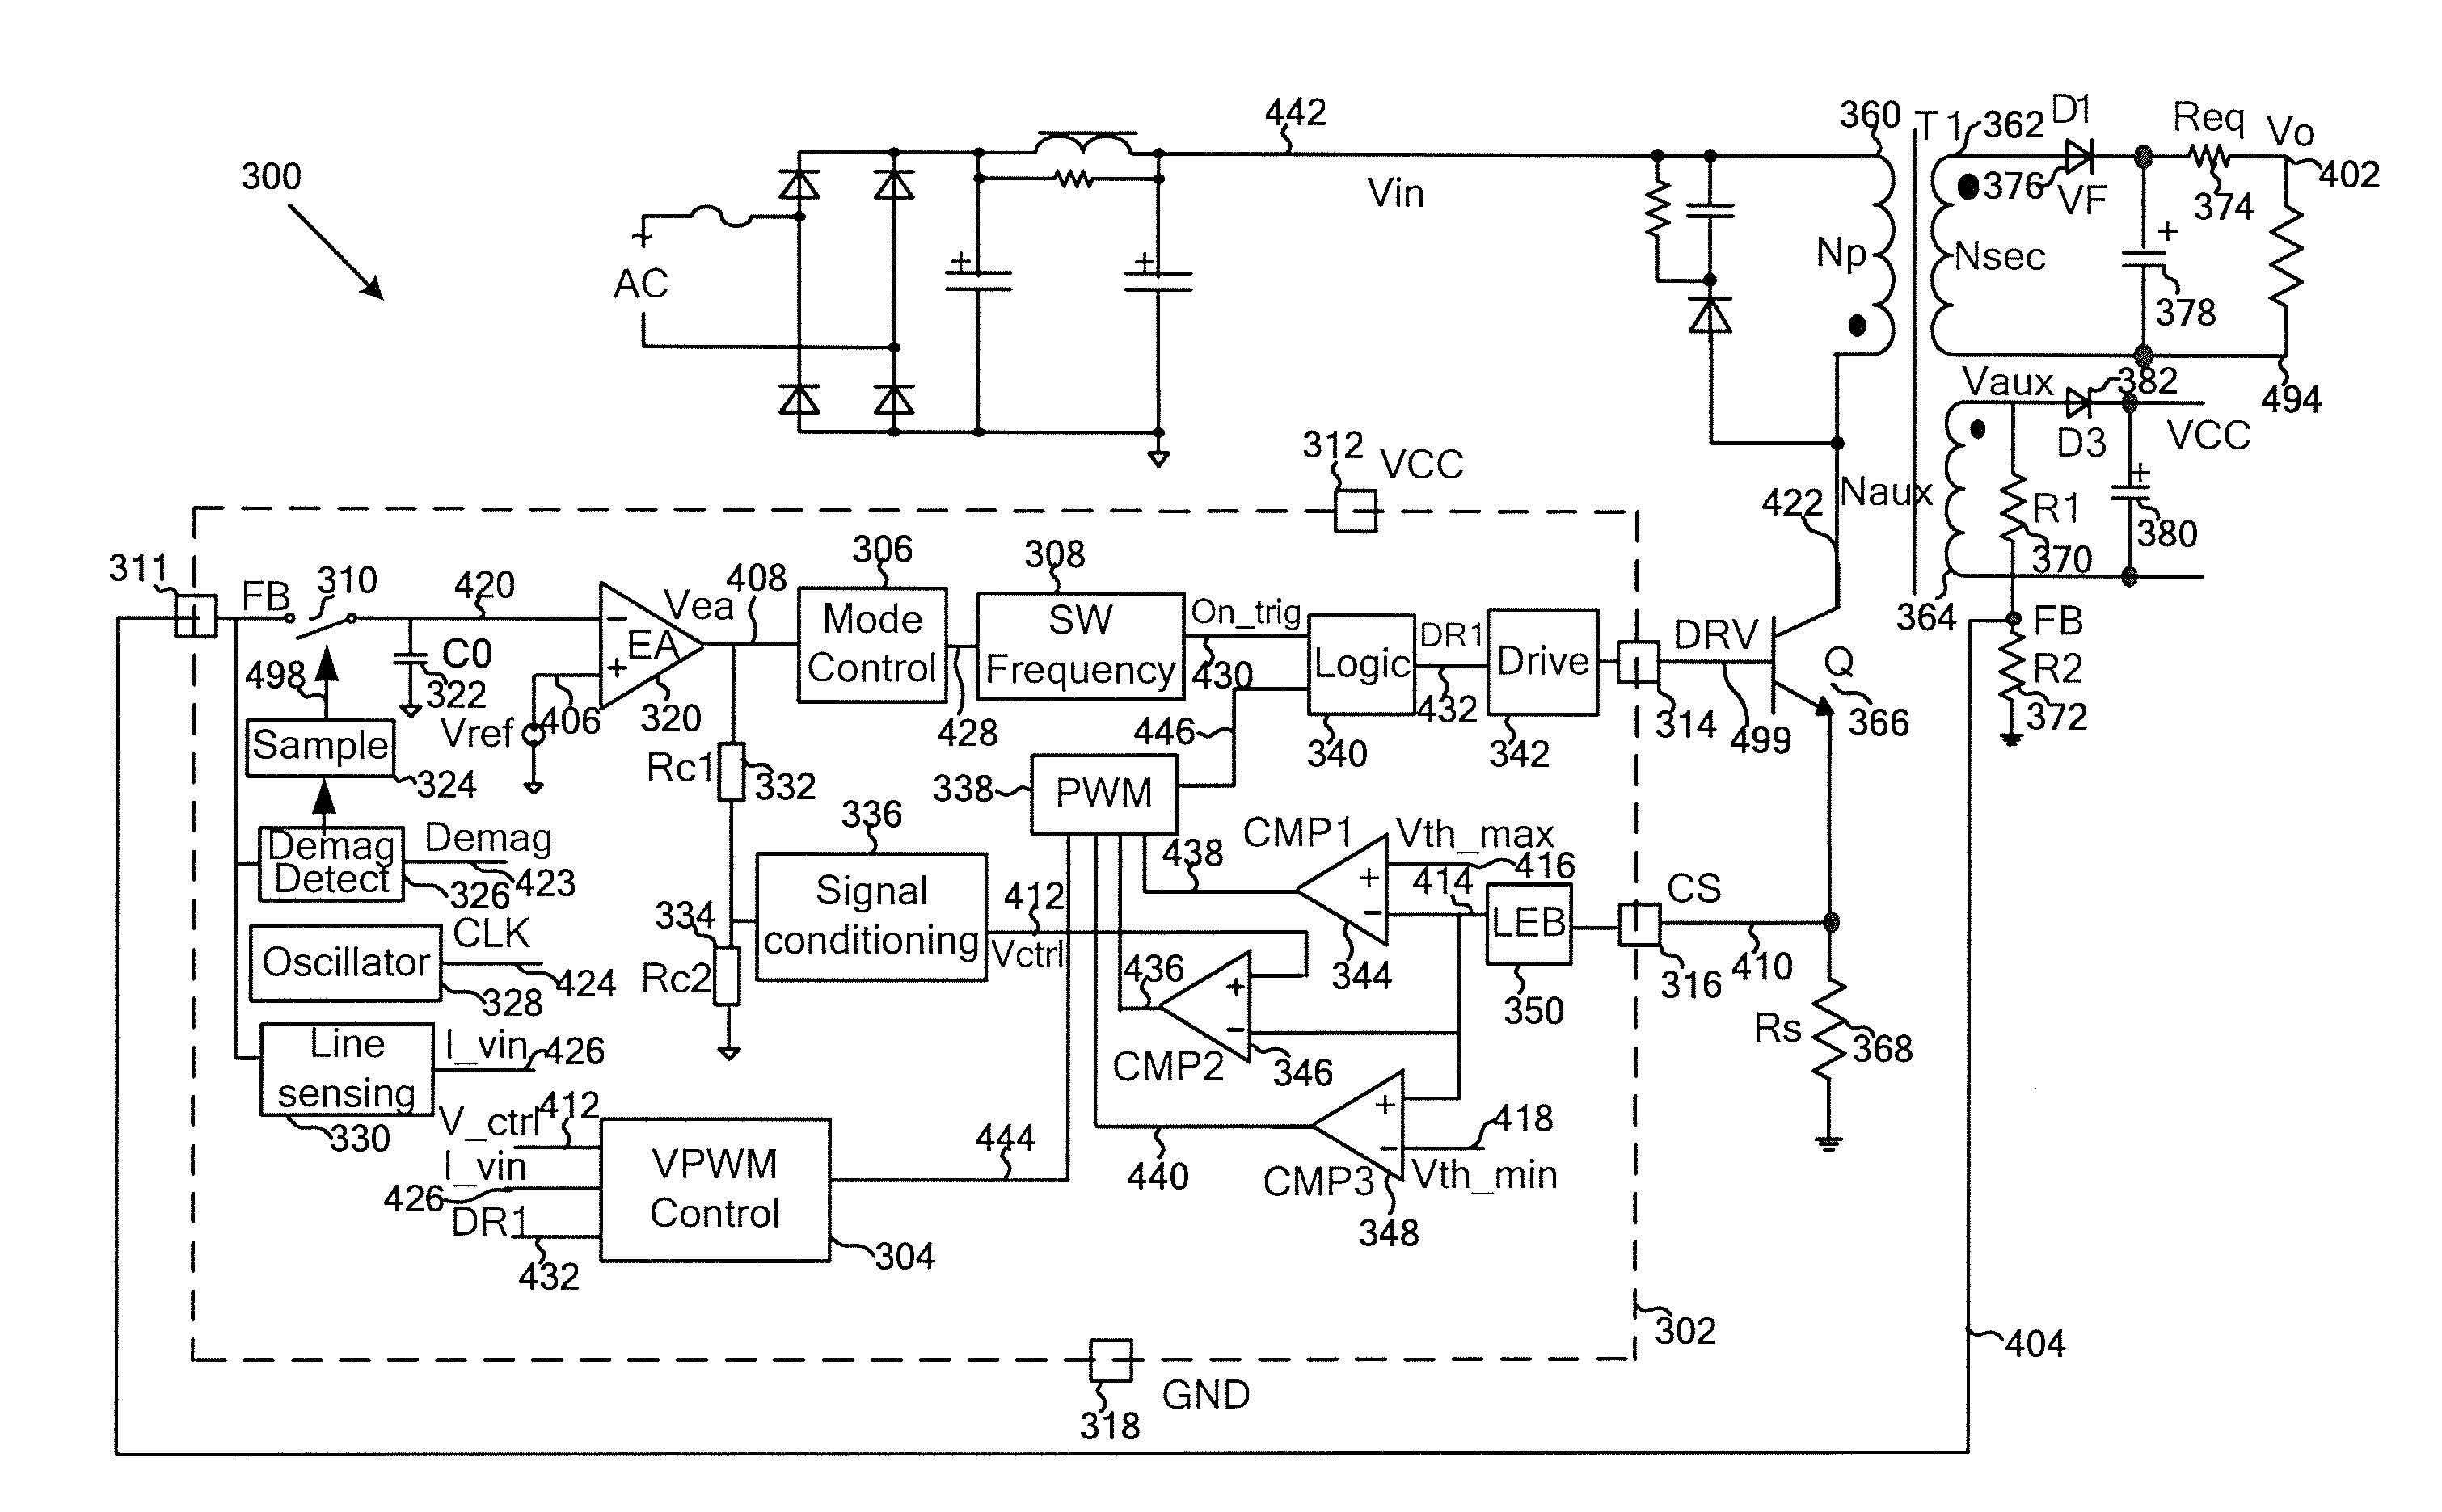 Systems and methods for peak current adjustments in power conversion systems